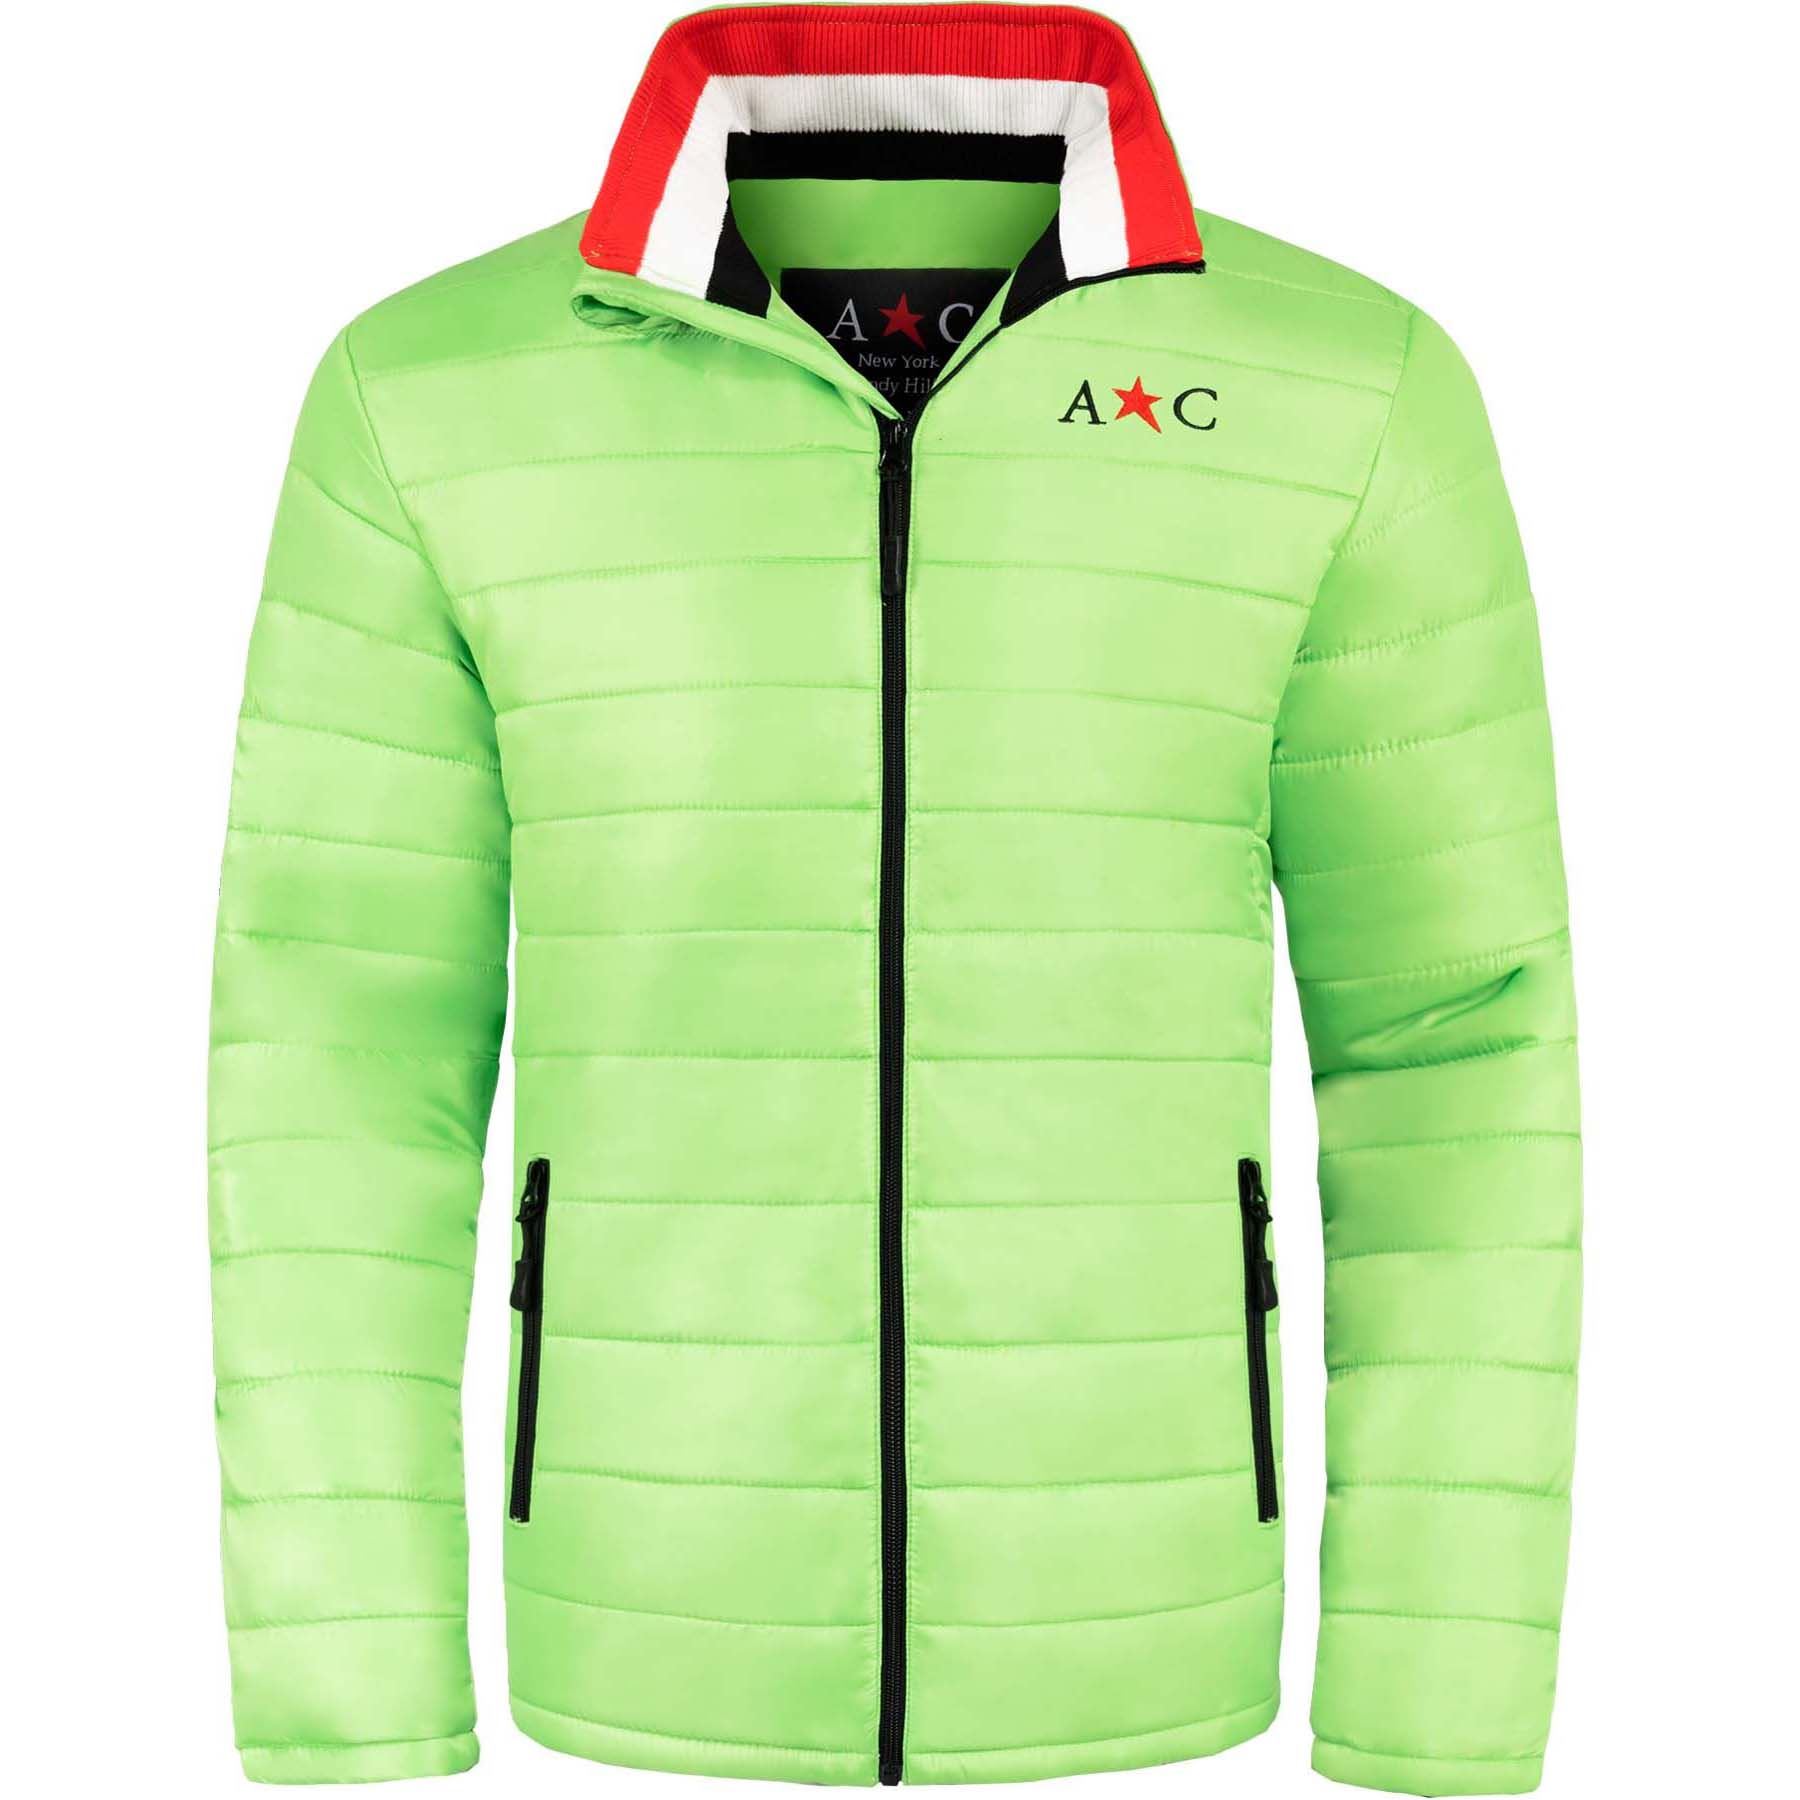 AC by Andy HILFIGER Winter jacket Men